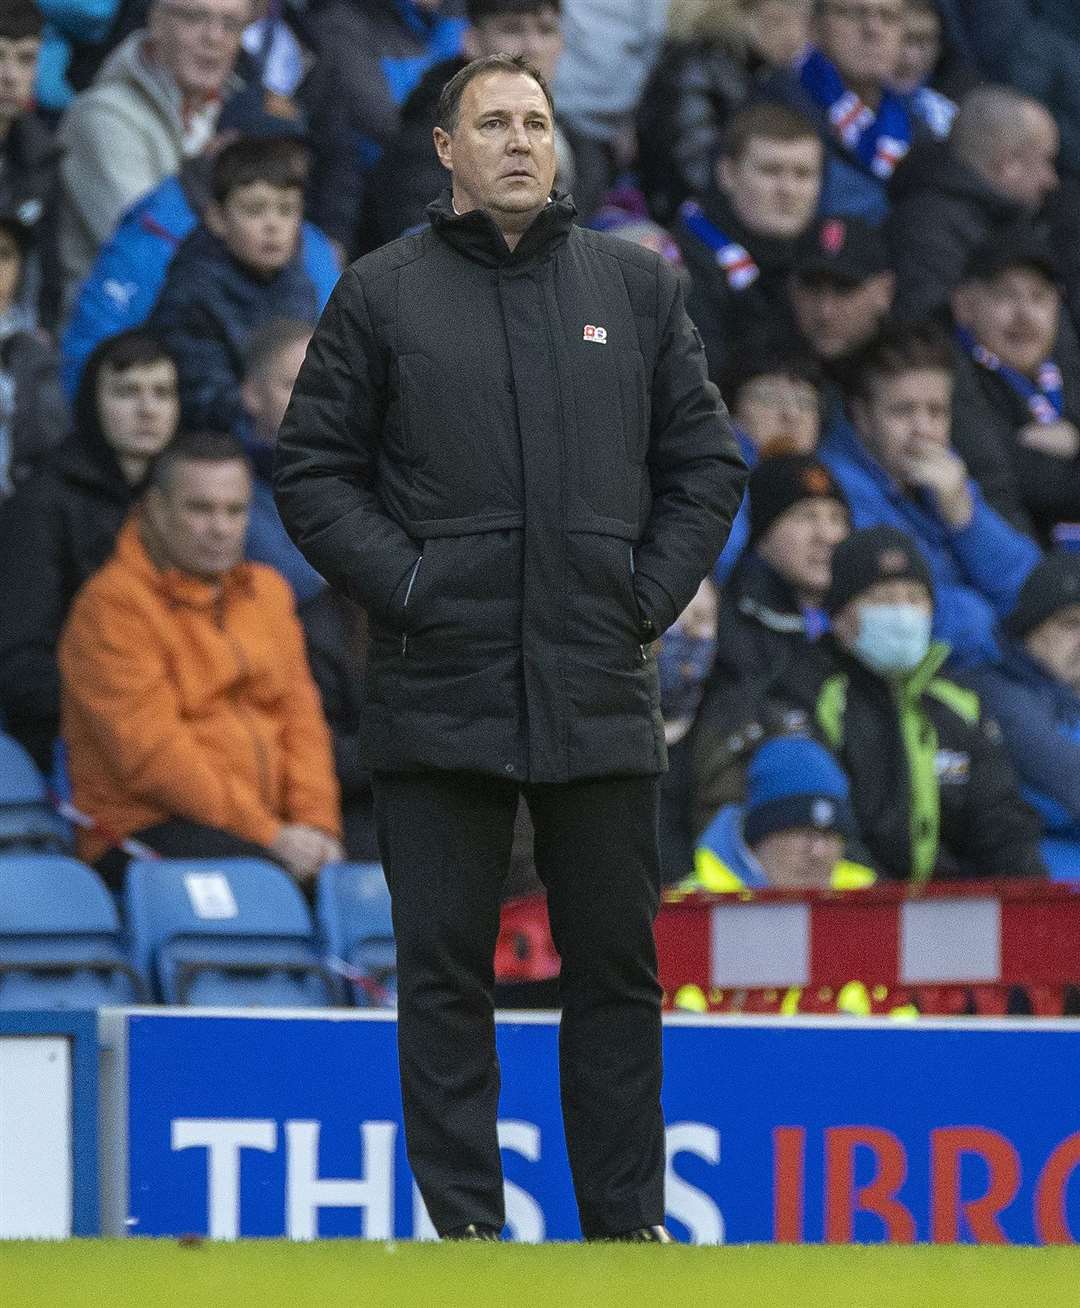 Picture - Ken Macpherson, Inverness. Rangers(4) v Ross County(2). 07.11.21. Ross County manager Malky Mackay.